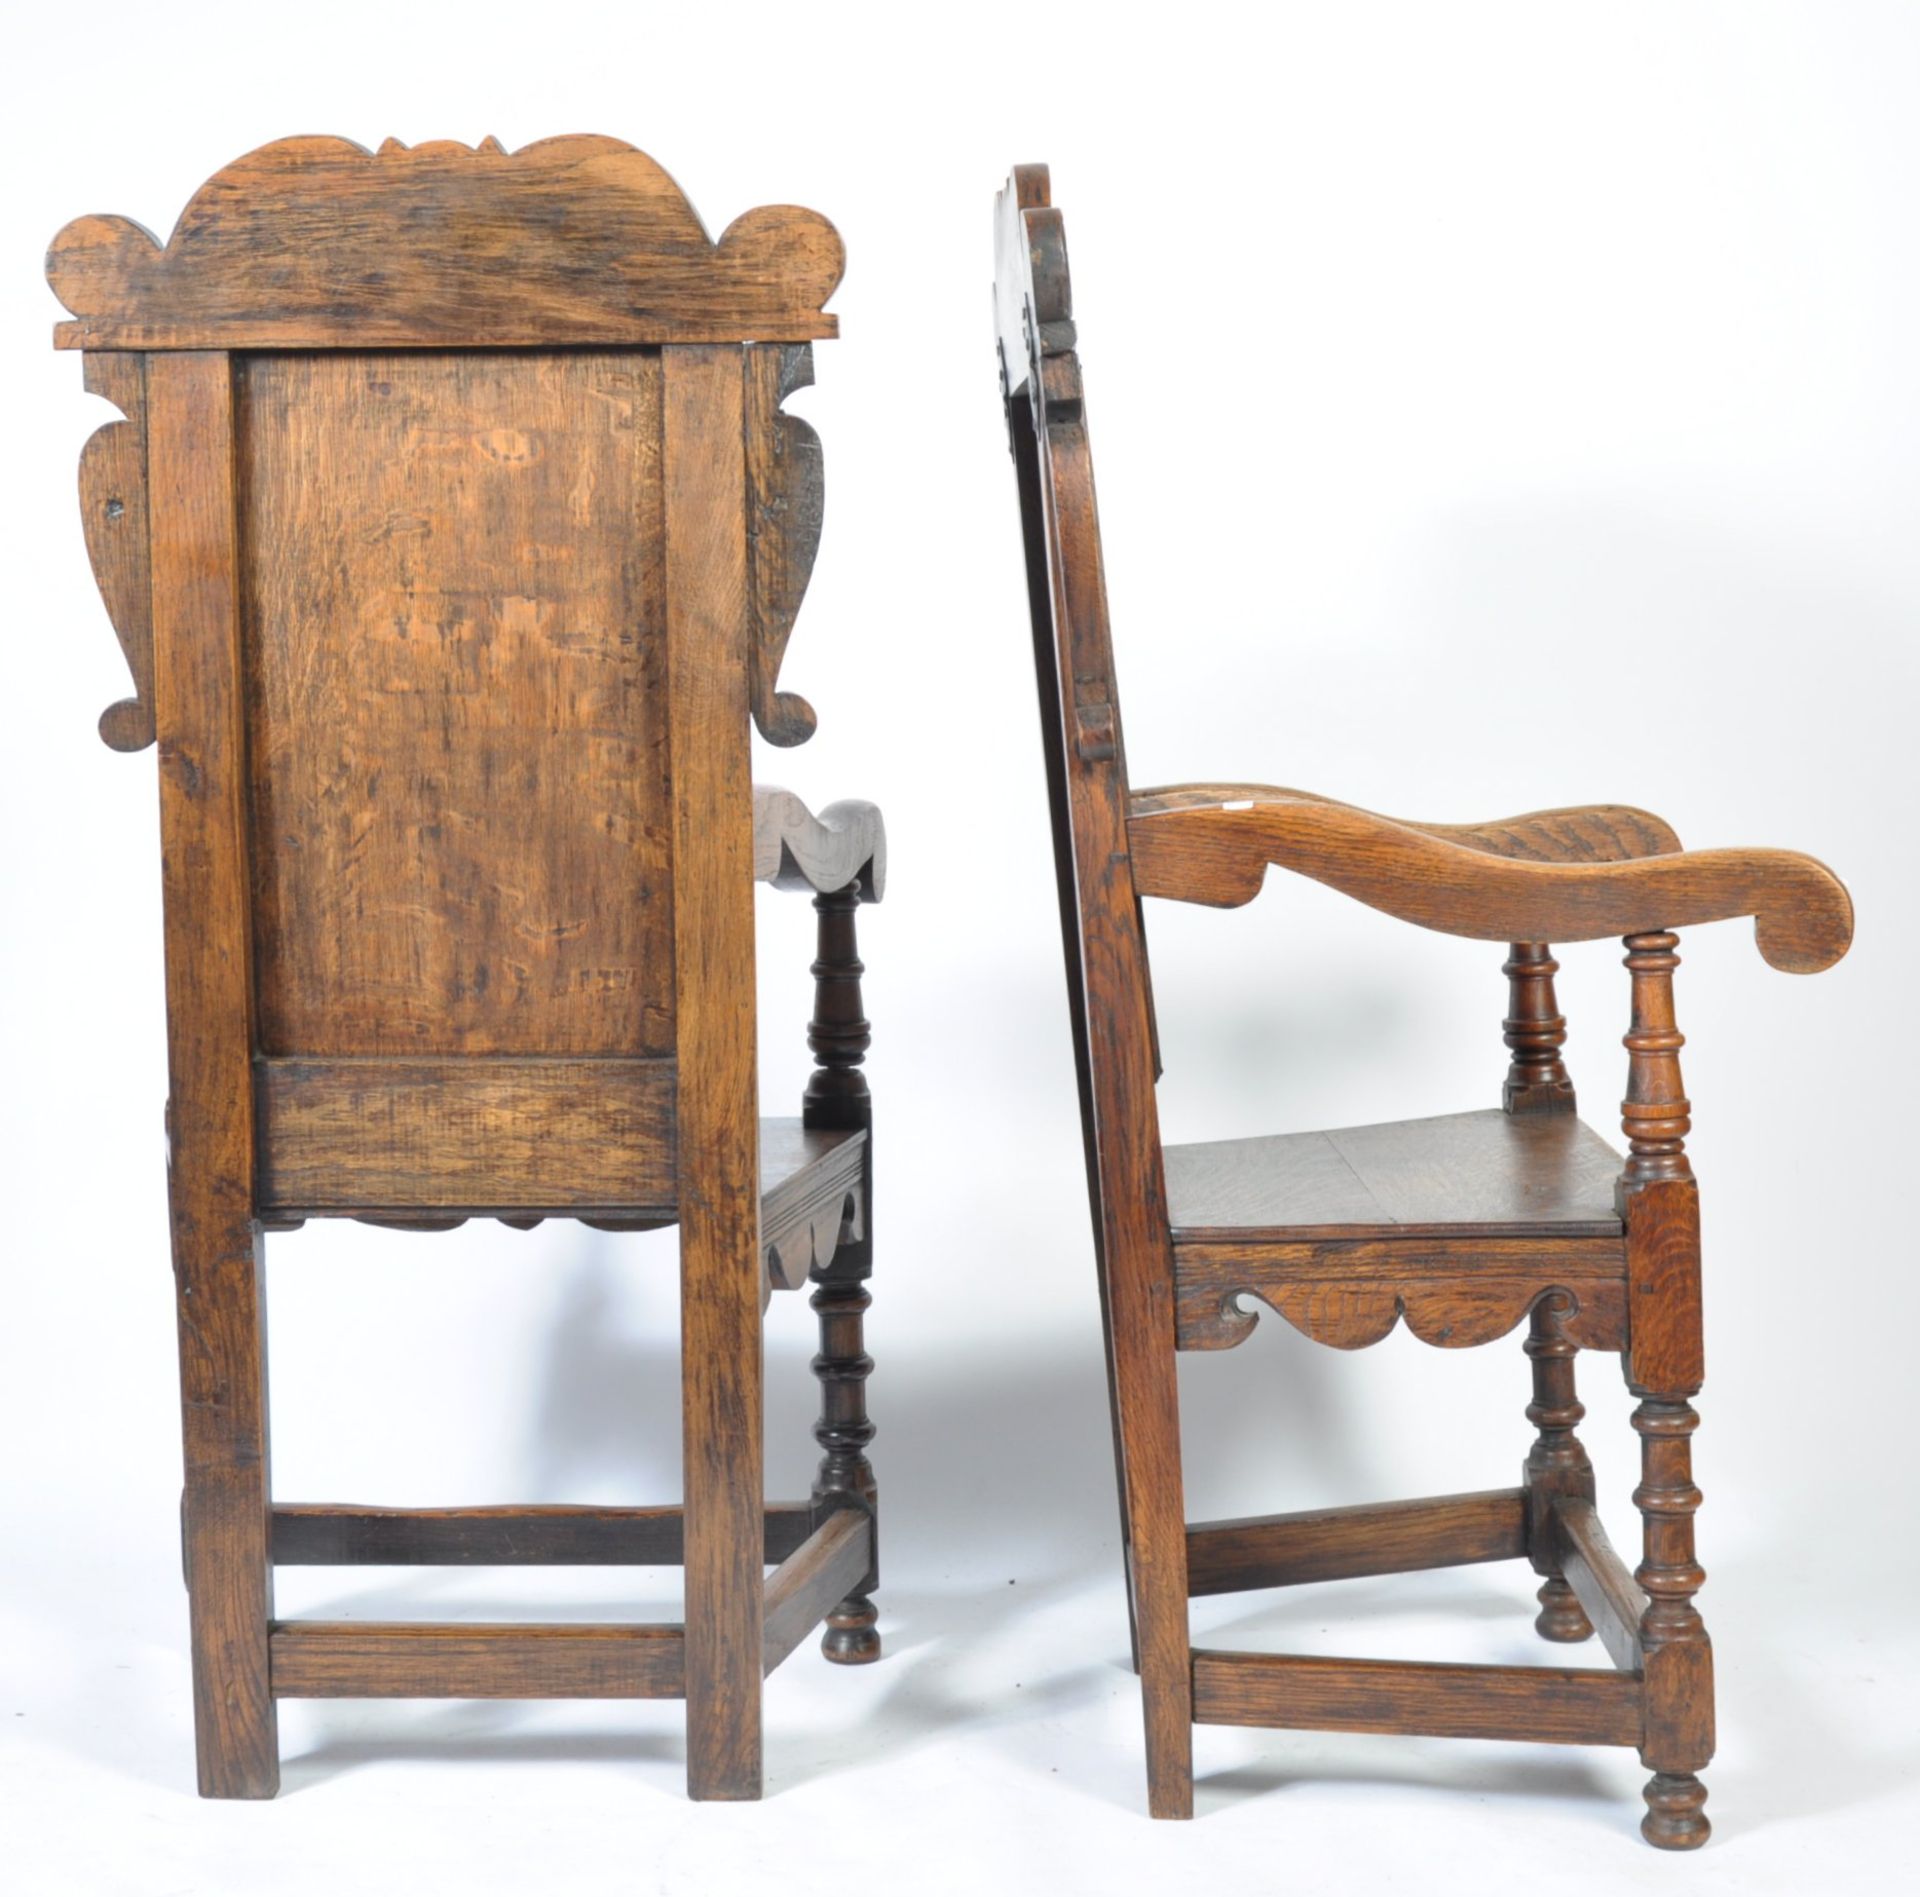 PAIR OF EARLY 20TH CENTURY OAK WAINSCOT CHAIRS - Image 4 of 6